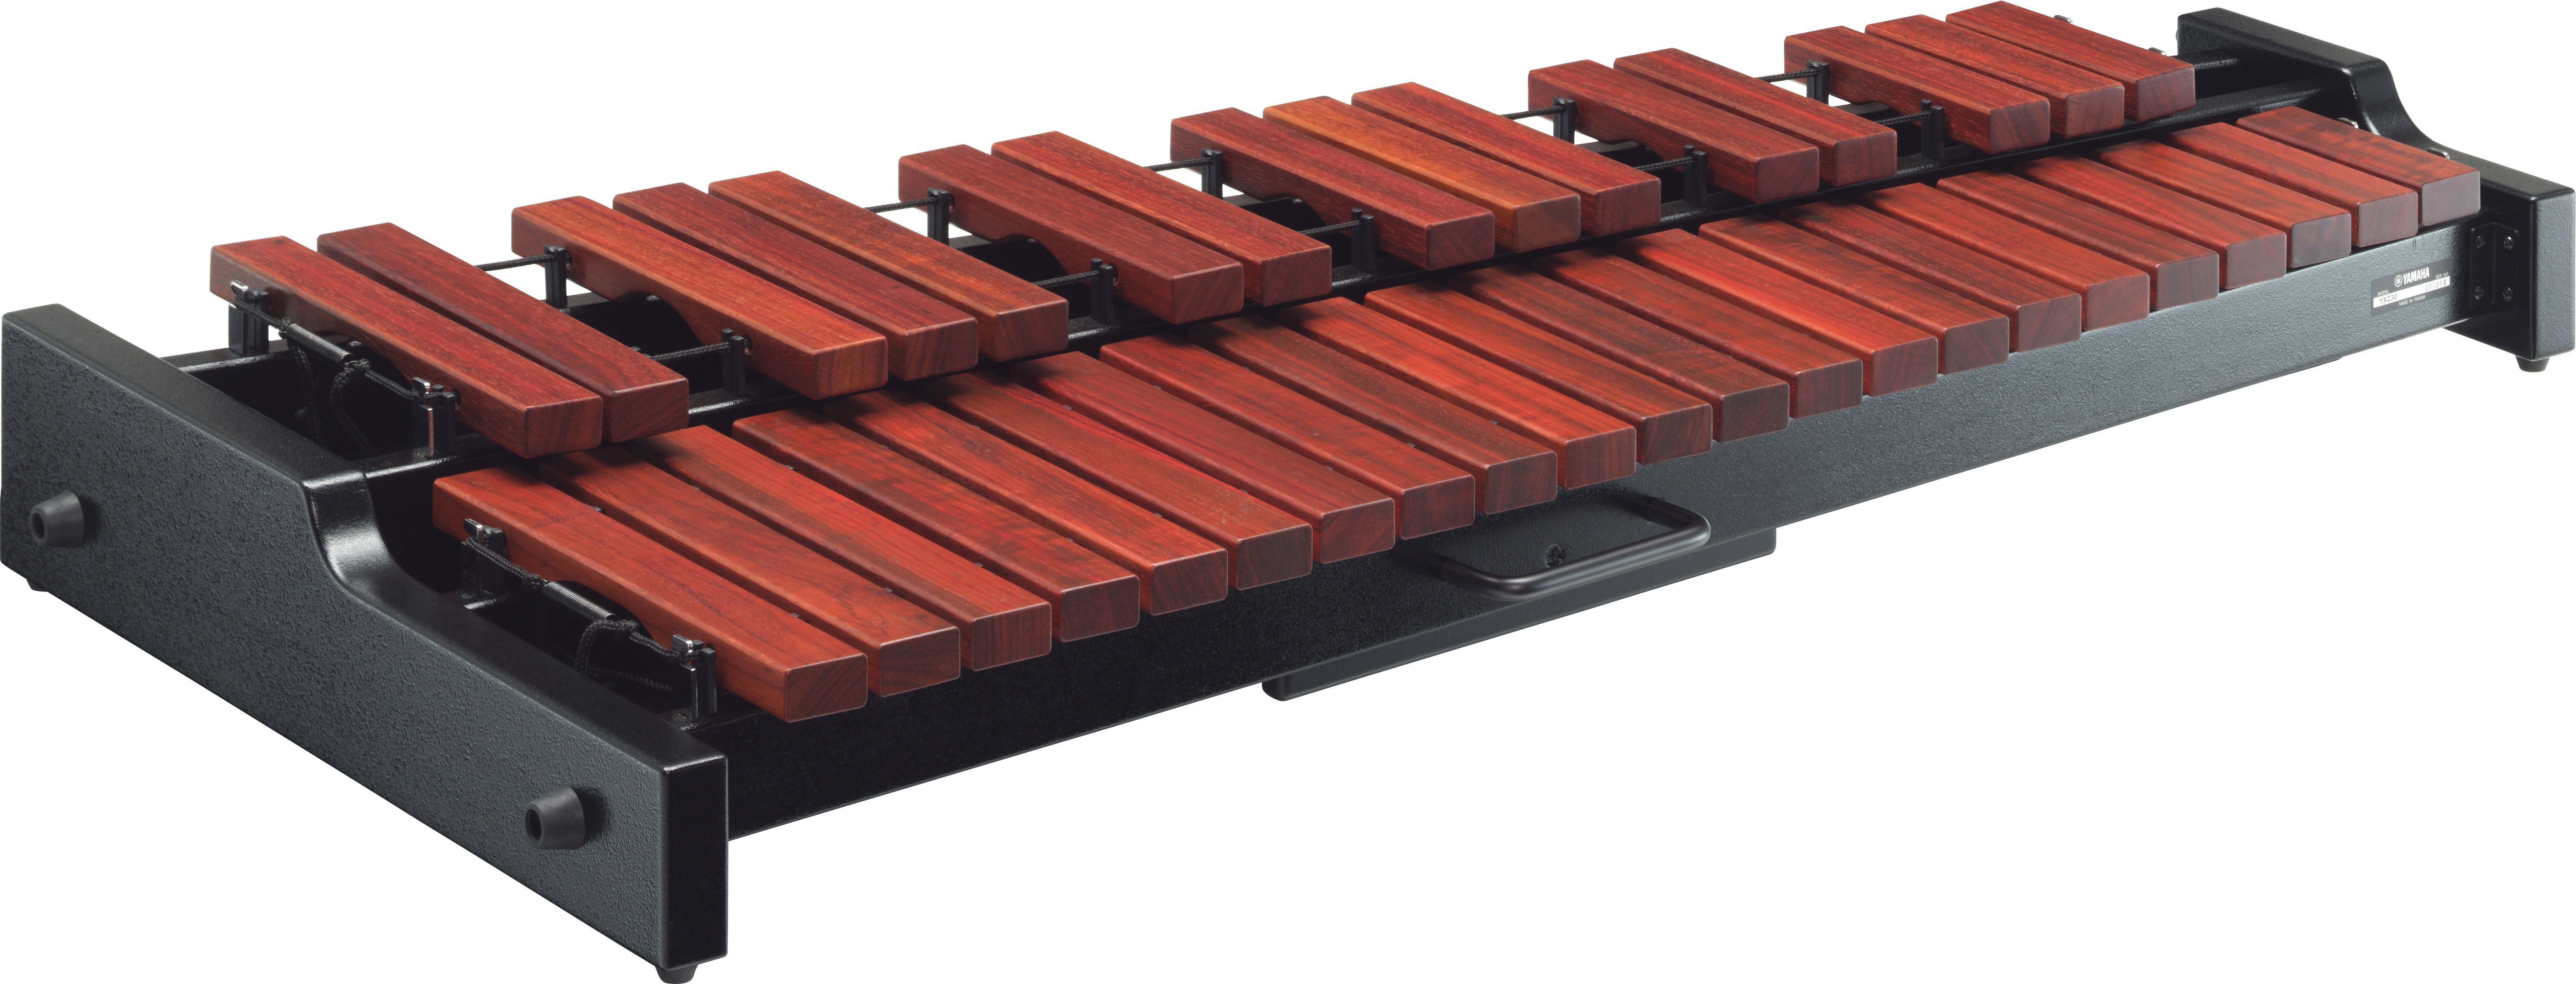 YX-230 - Overview - Xylophones - Percussion - Musical Instruments 